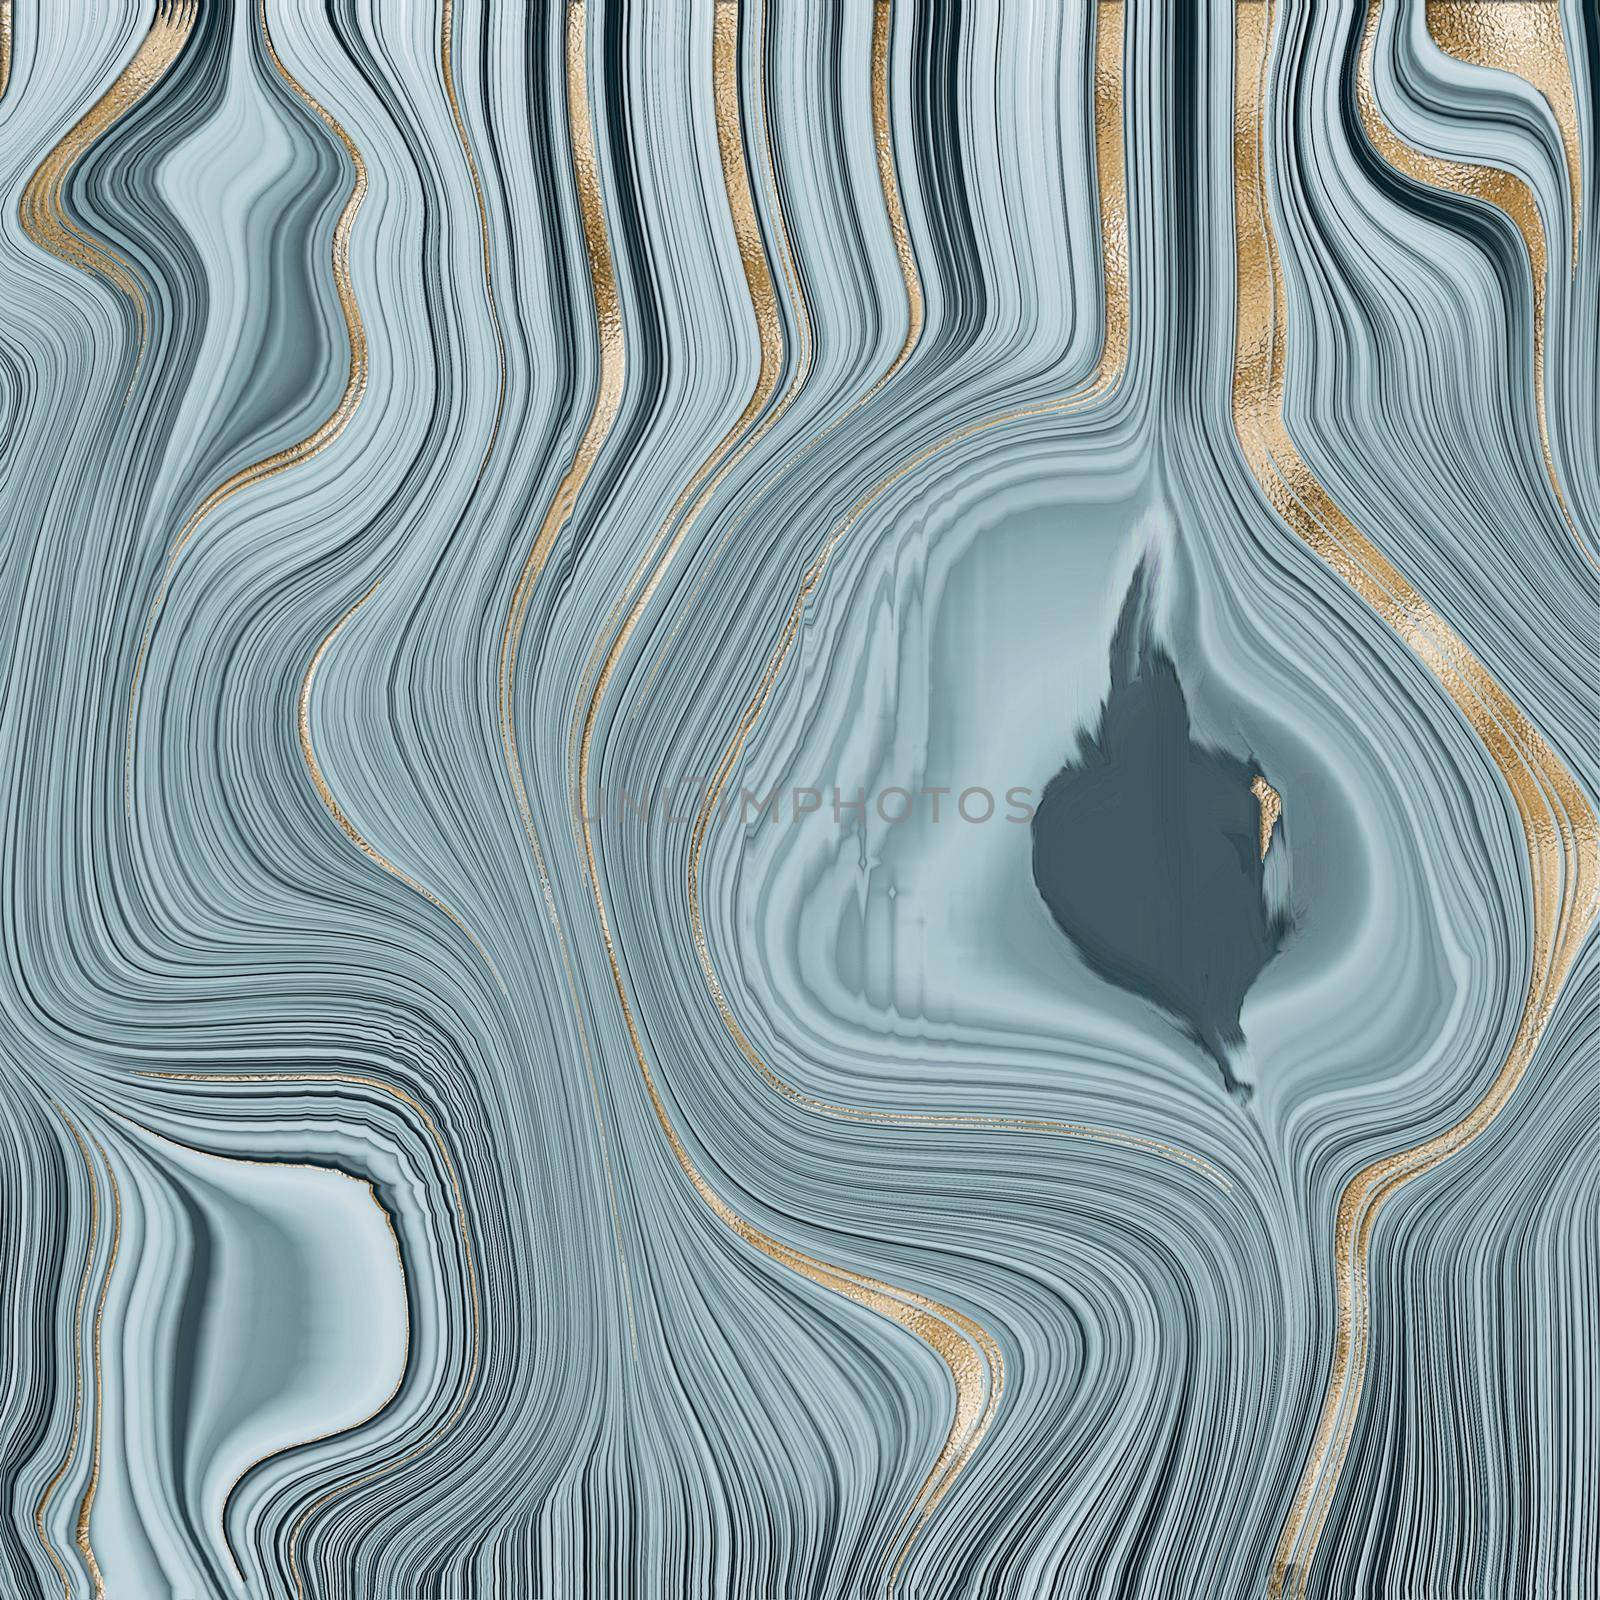 Agate stone texture with gold. Fluid marbling effect. Abstract Agate Background. Illustration